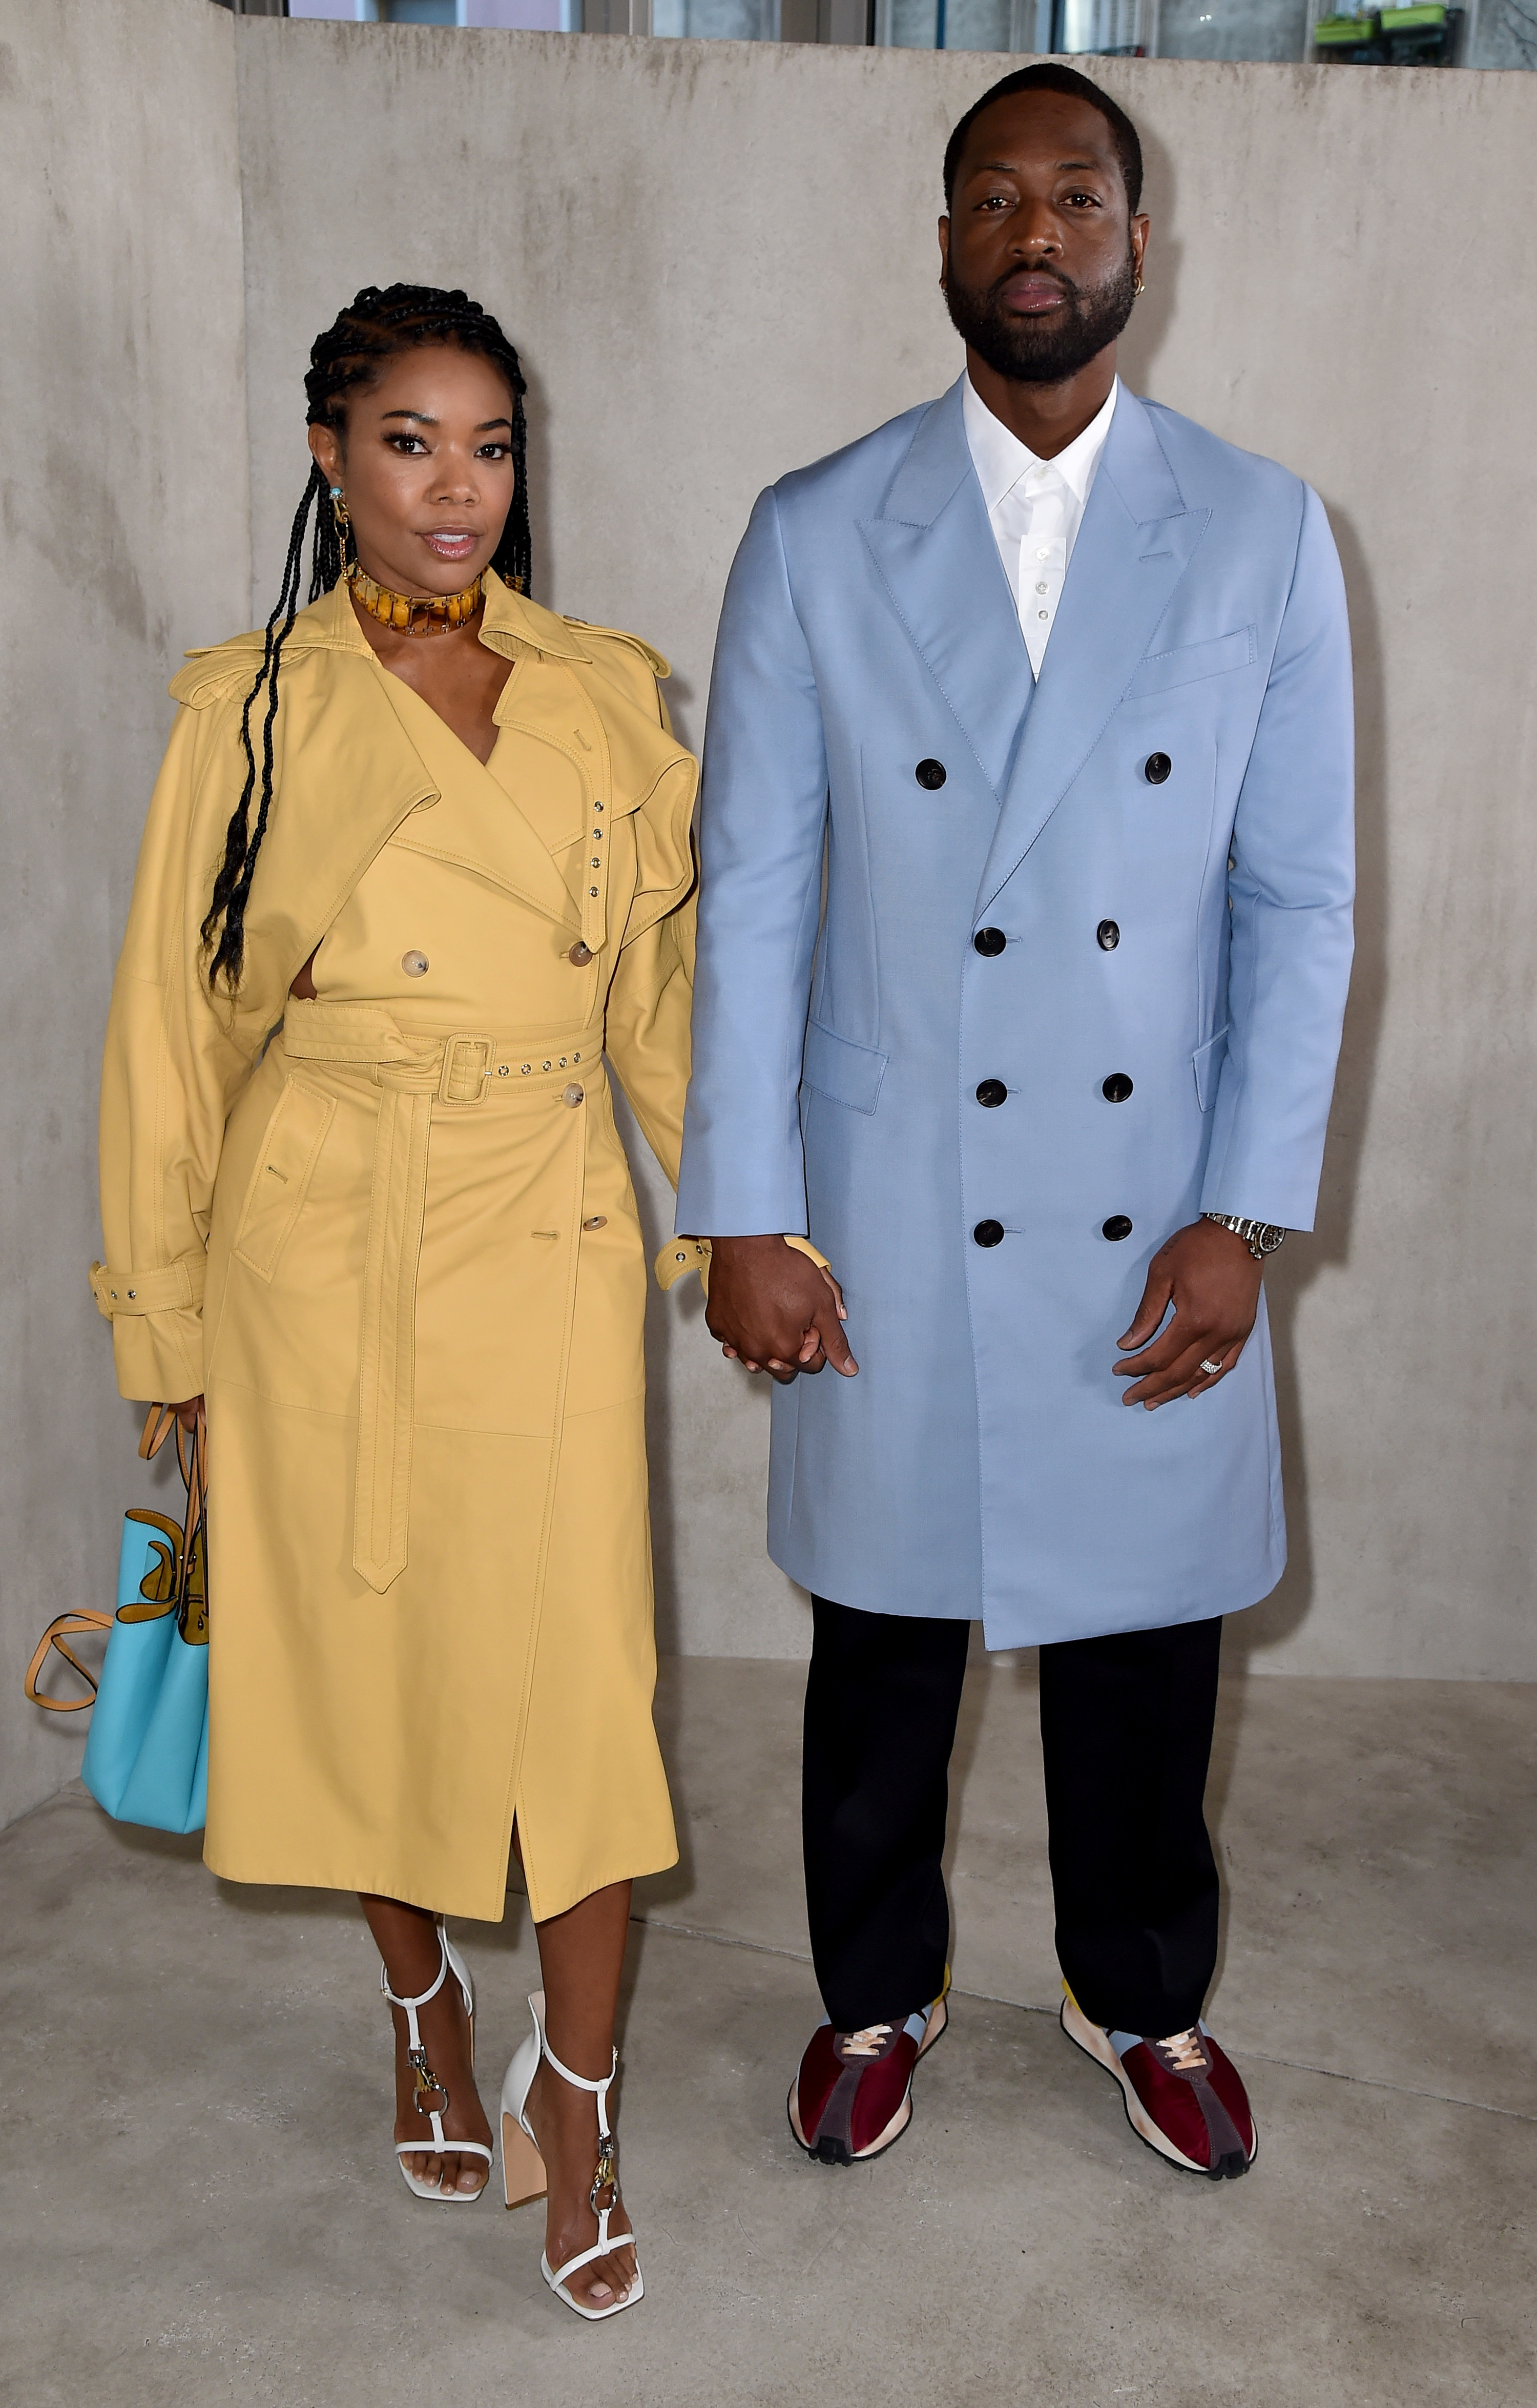 Gabrielle and Dwyane hand-in-hand wearing raincoats